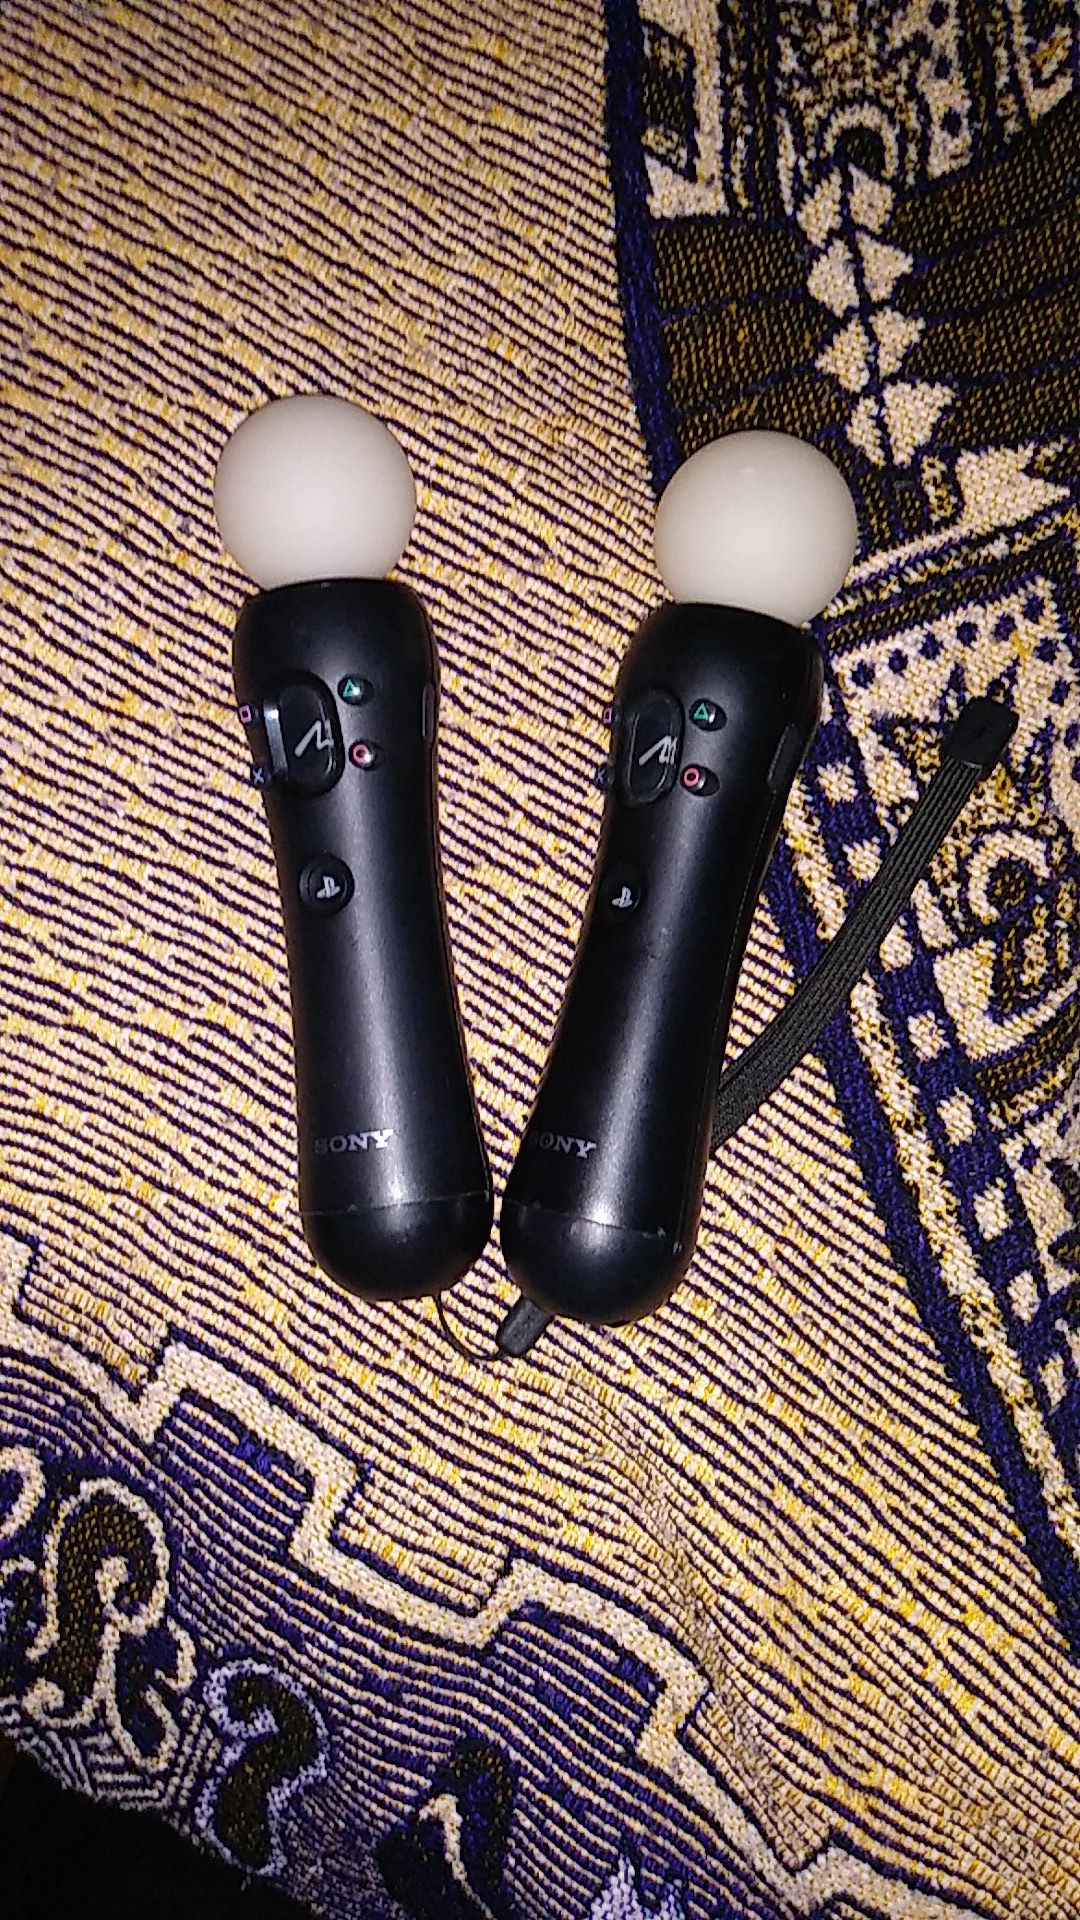 Ps3 motion controllers